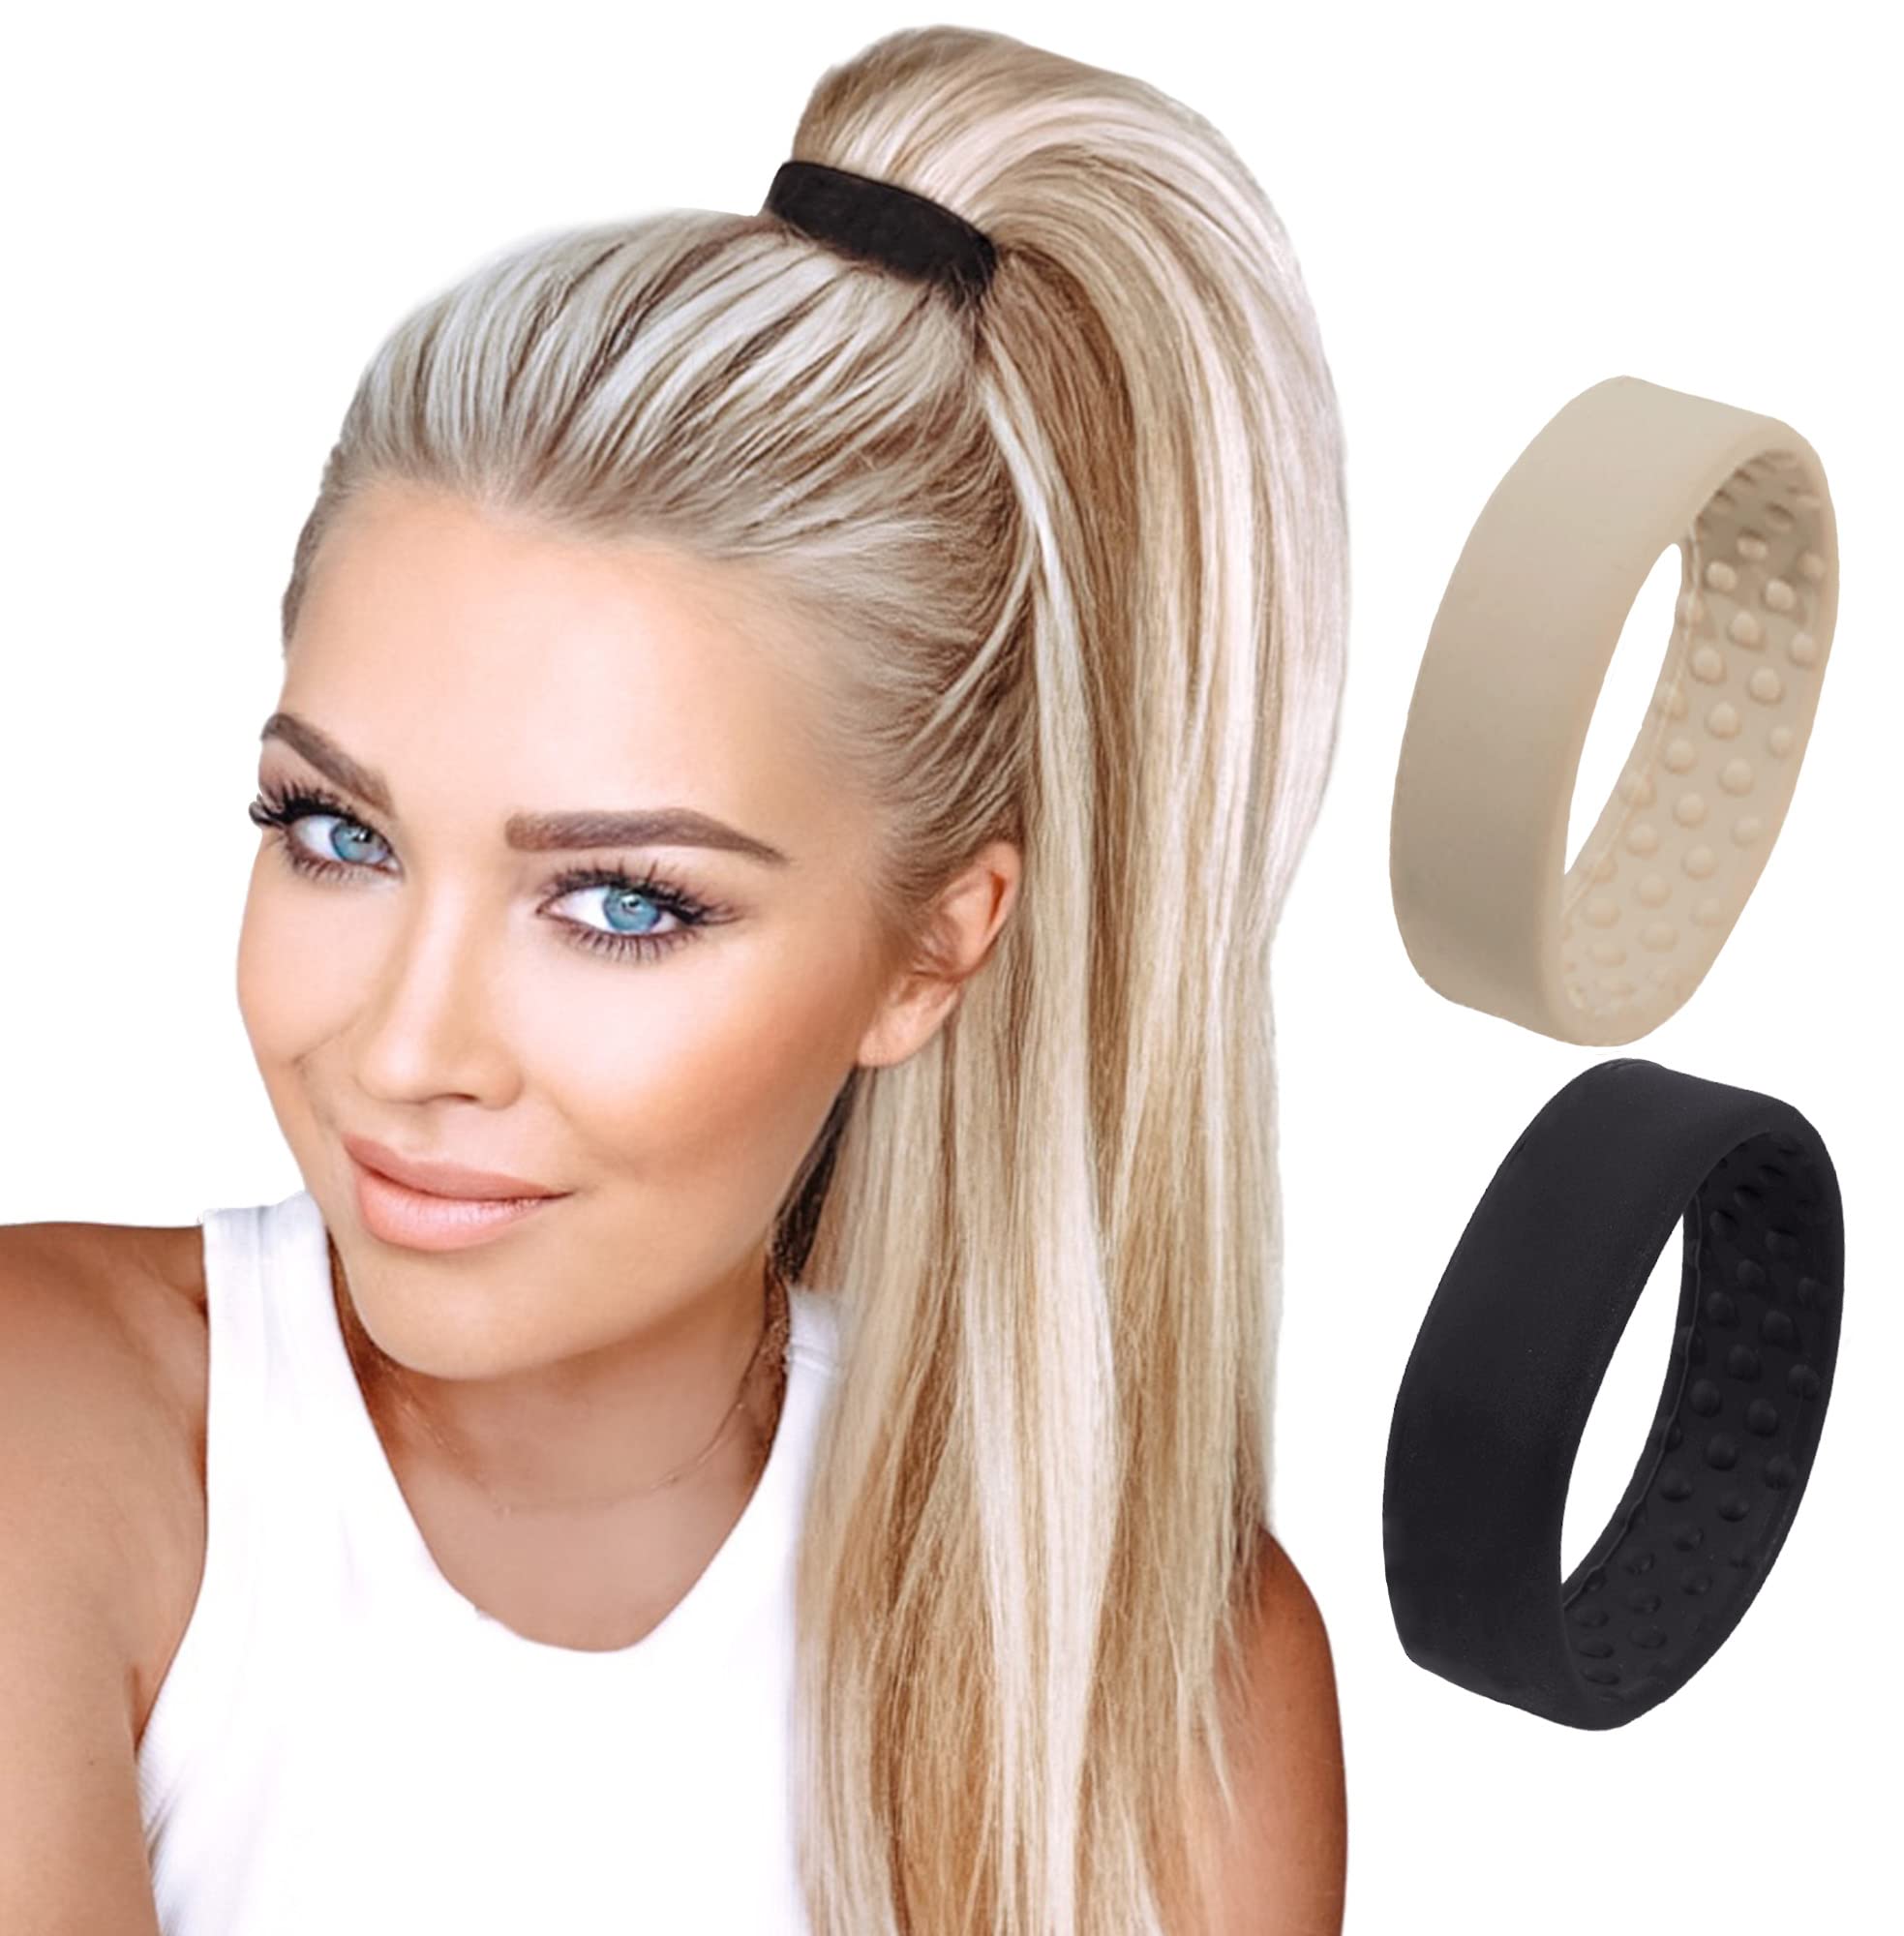 Say Goodbye to Hairties, and Hello to PonyO  PonyO is the only hair  accessory on the market designed to hold any hair type super tight without  ever damaging or creasing your